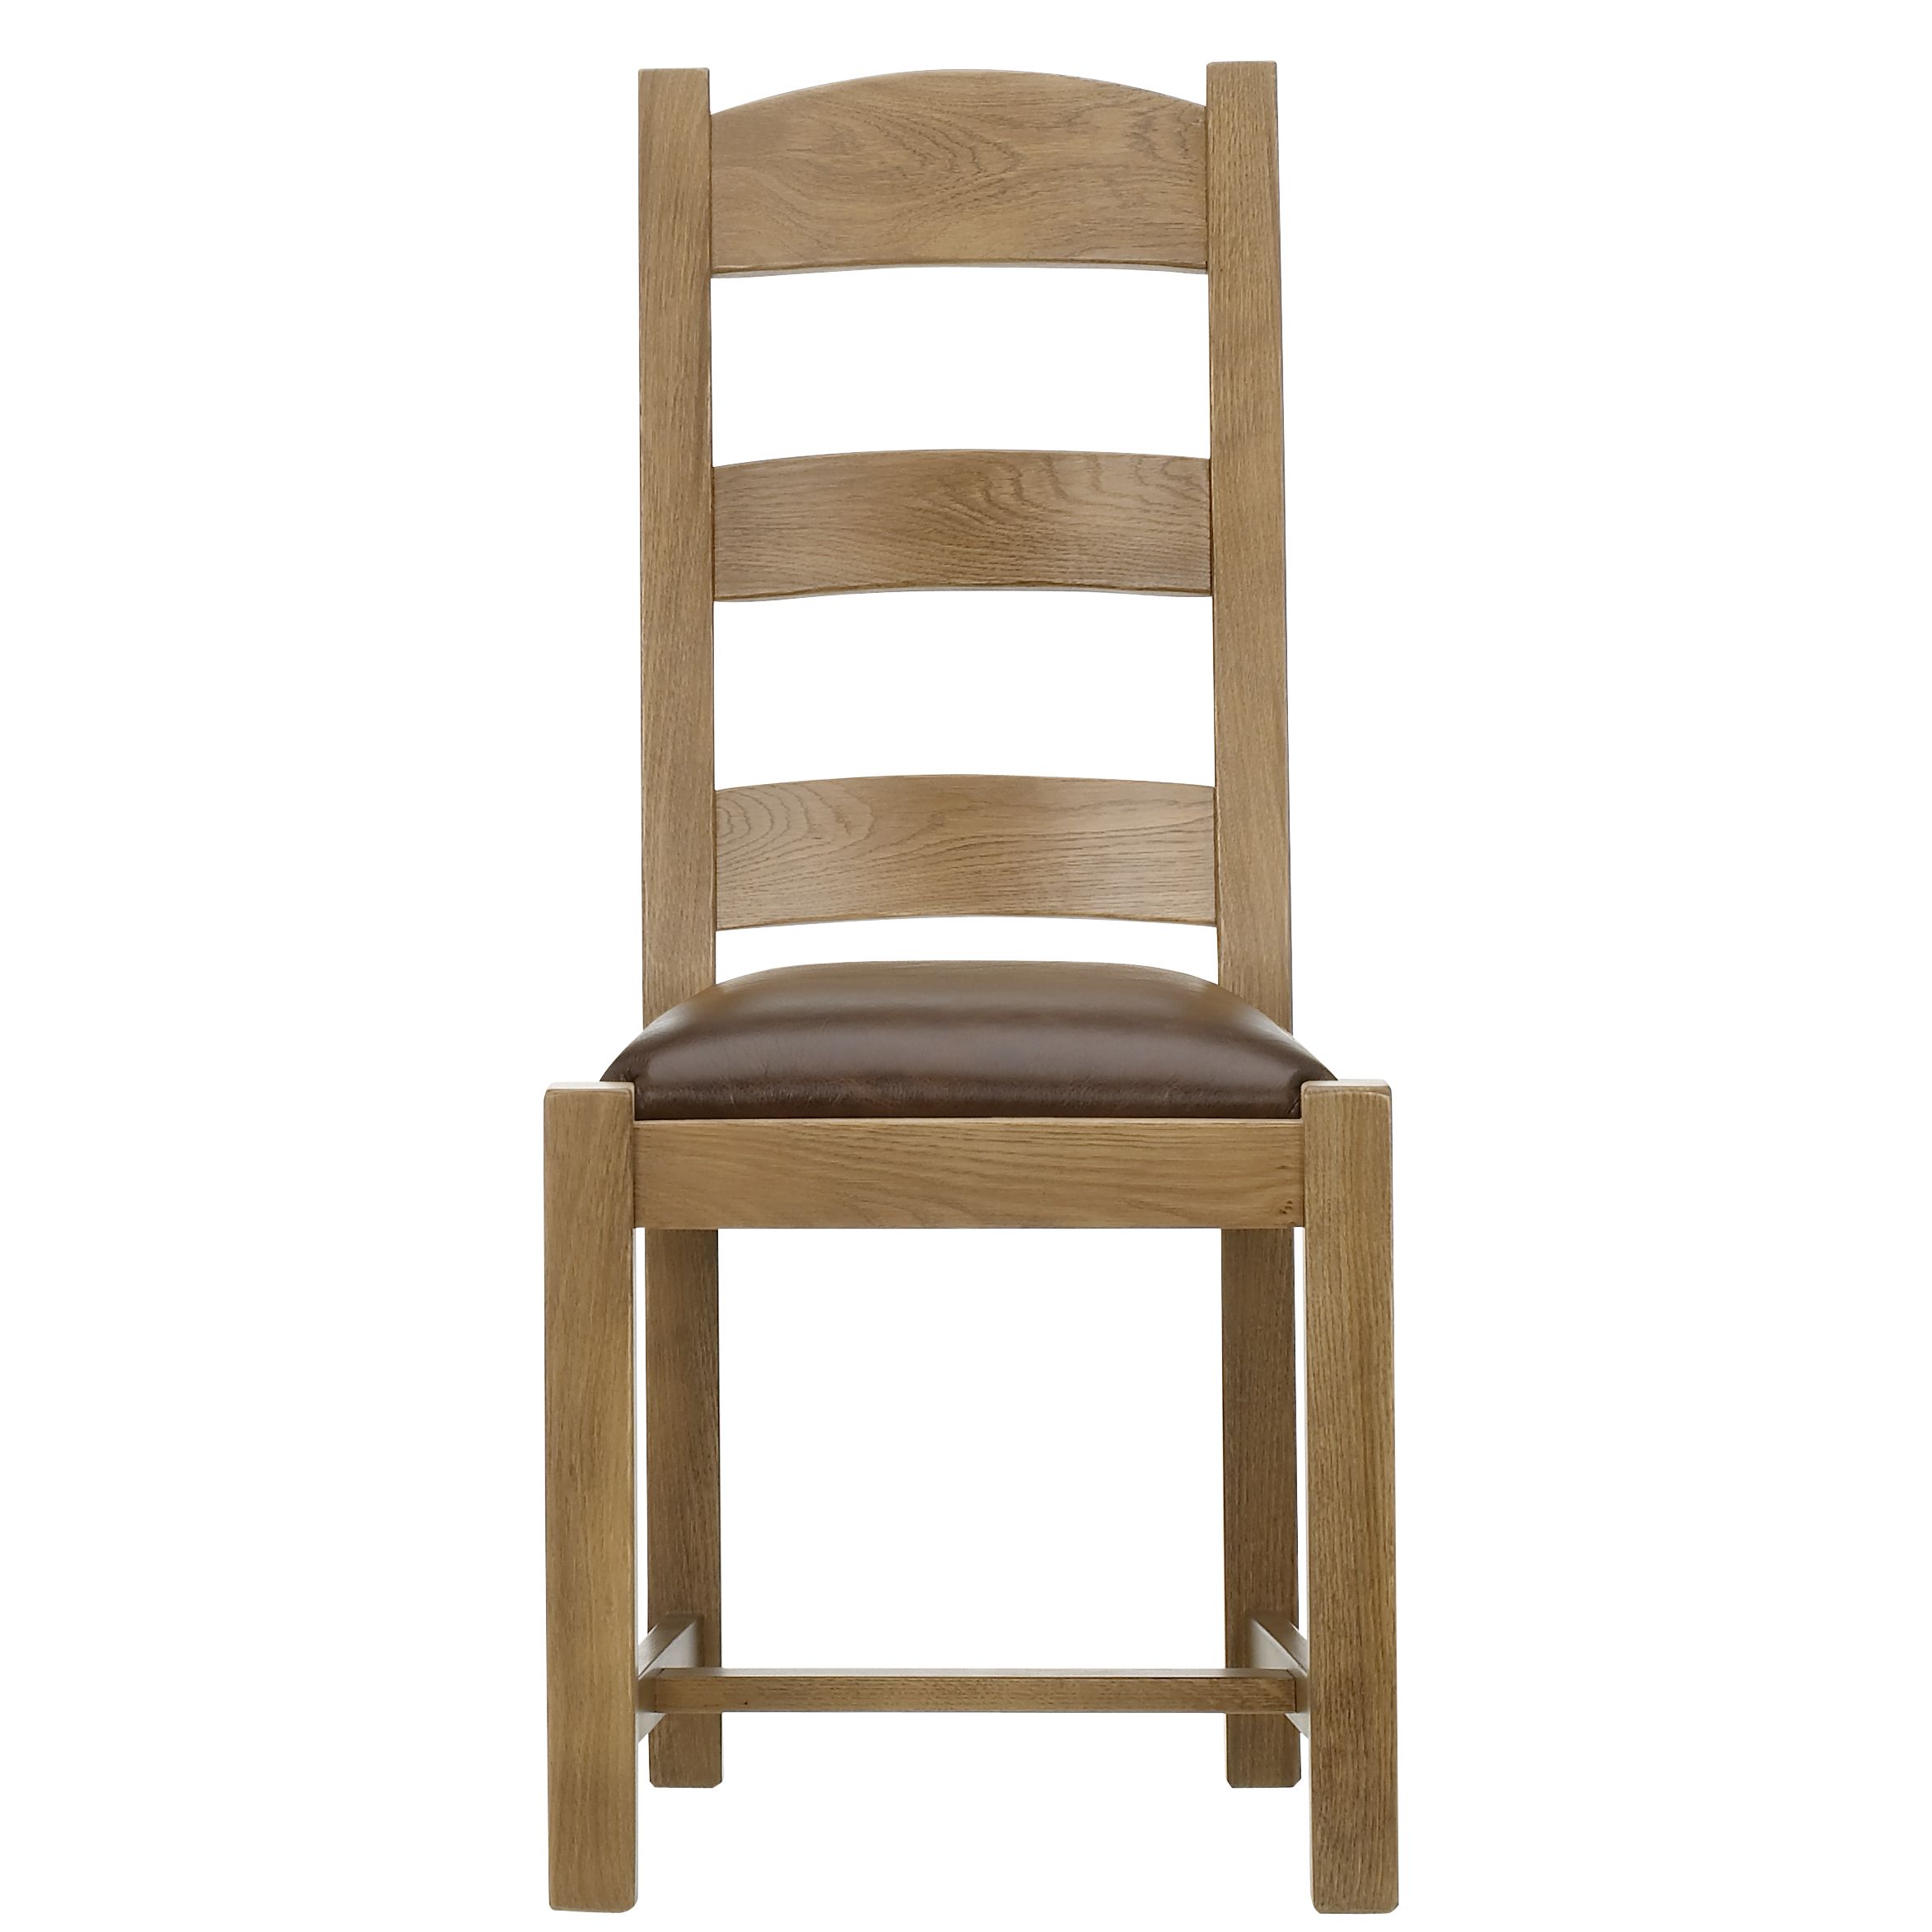 John Lewis Ardennes Leather Dining Chair, Cognac